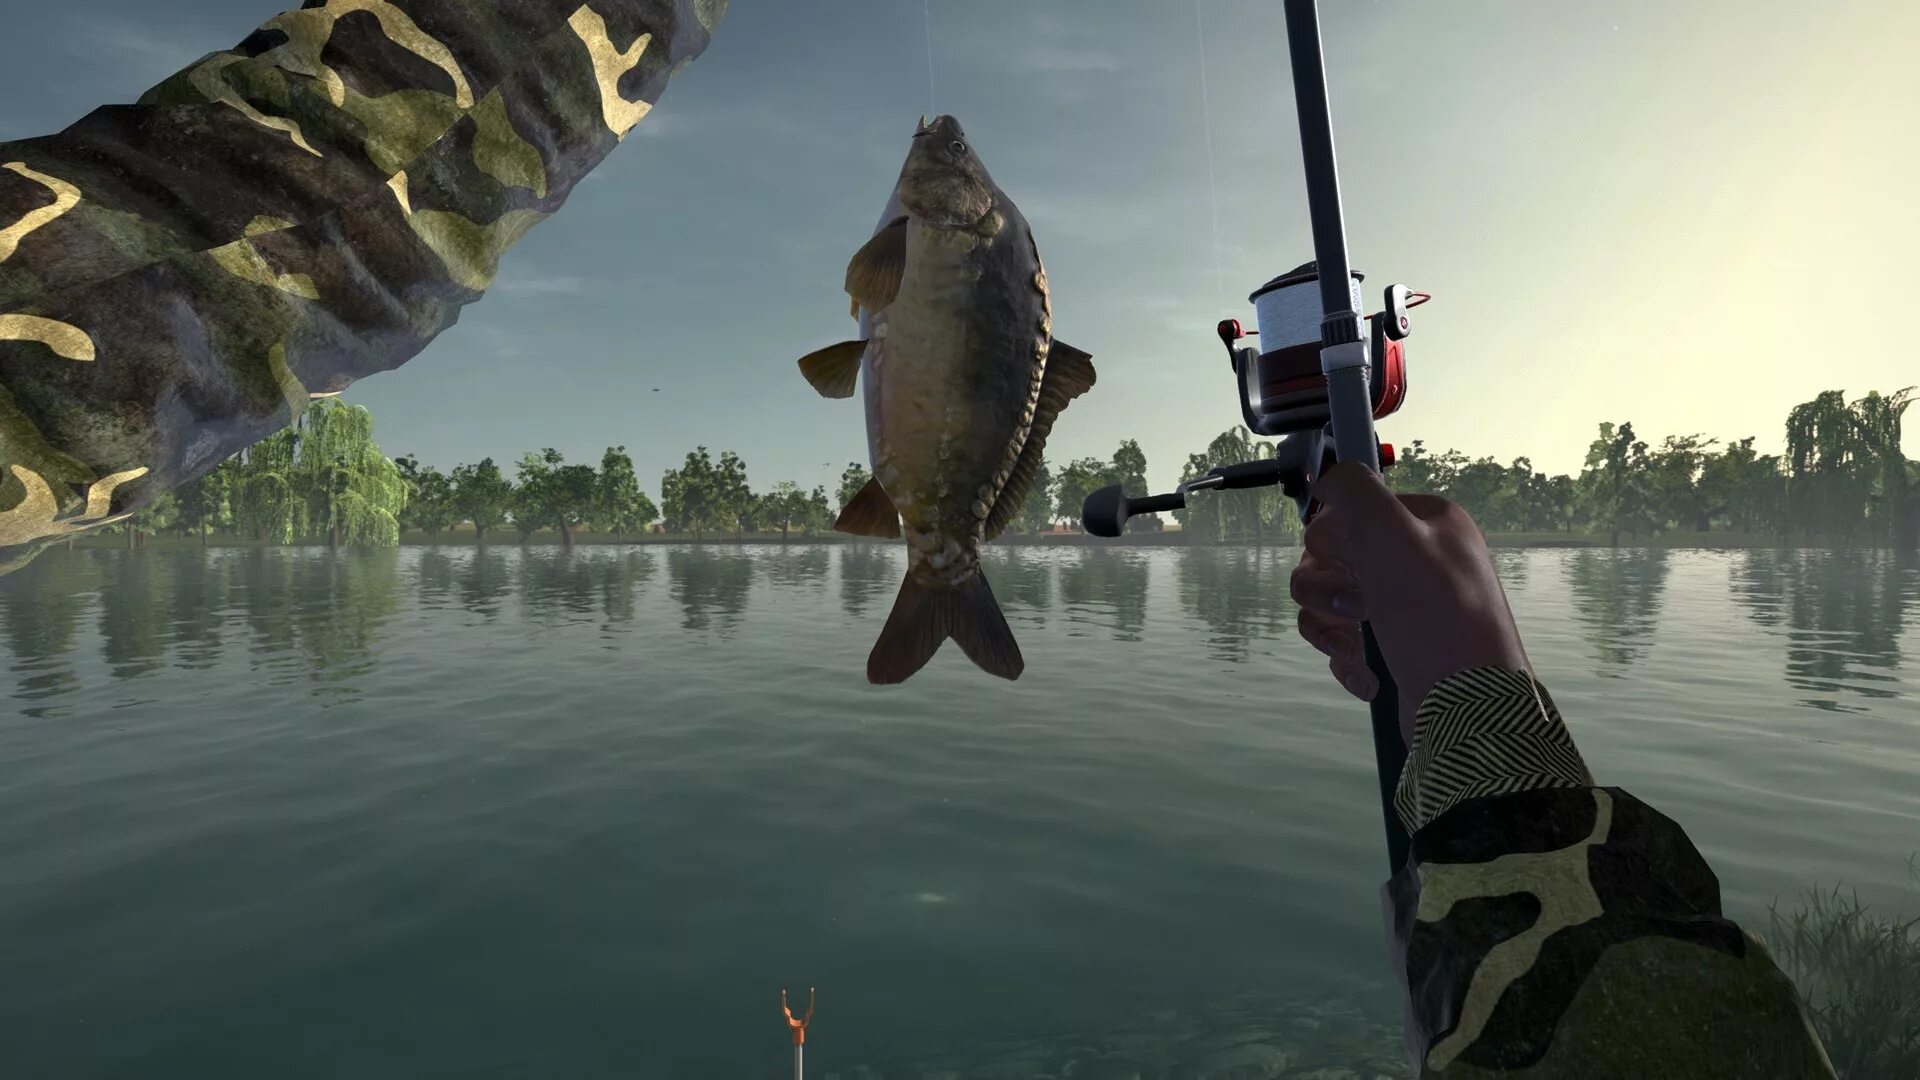 Exquisite fishing game. Игра Ultimate Fishing. Ultimate Fishing Simulator 2. Игра симулятор рыбалки professional Fishing. Симулятор рыбалки для ps4 Ultimate Fishing.